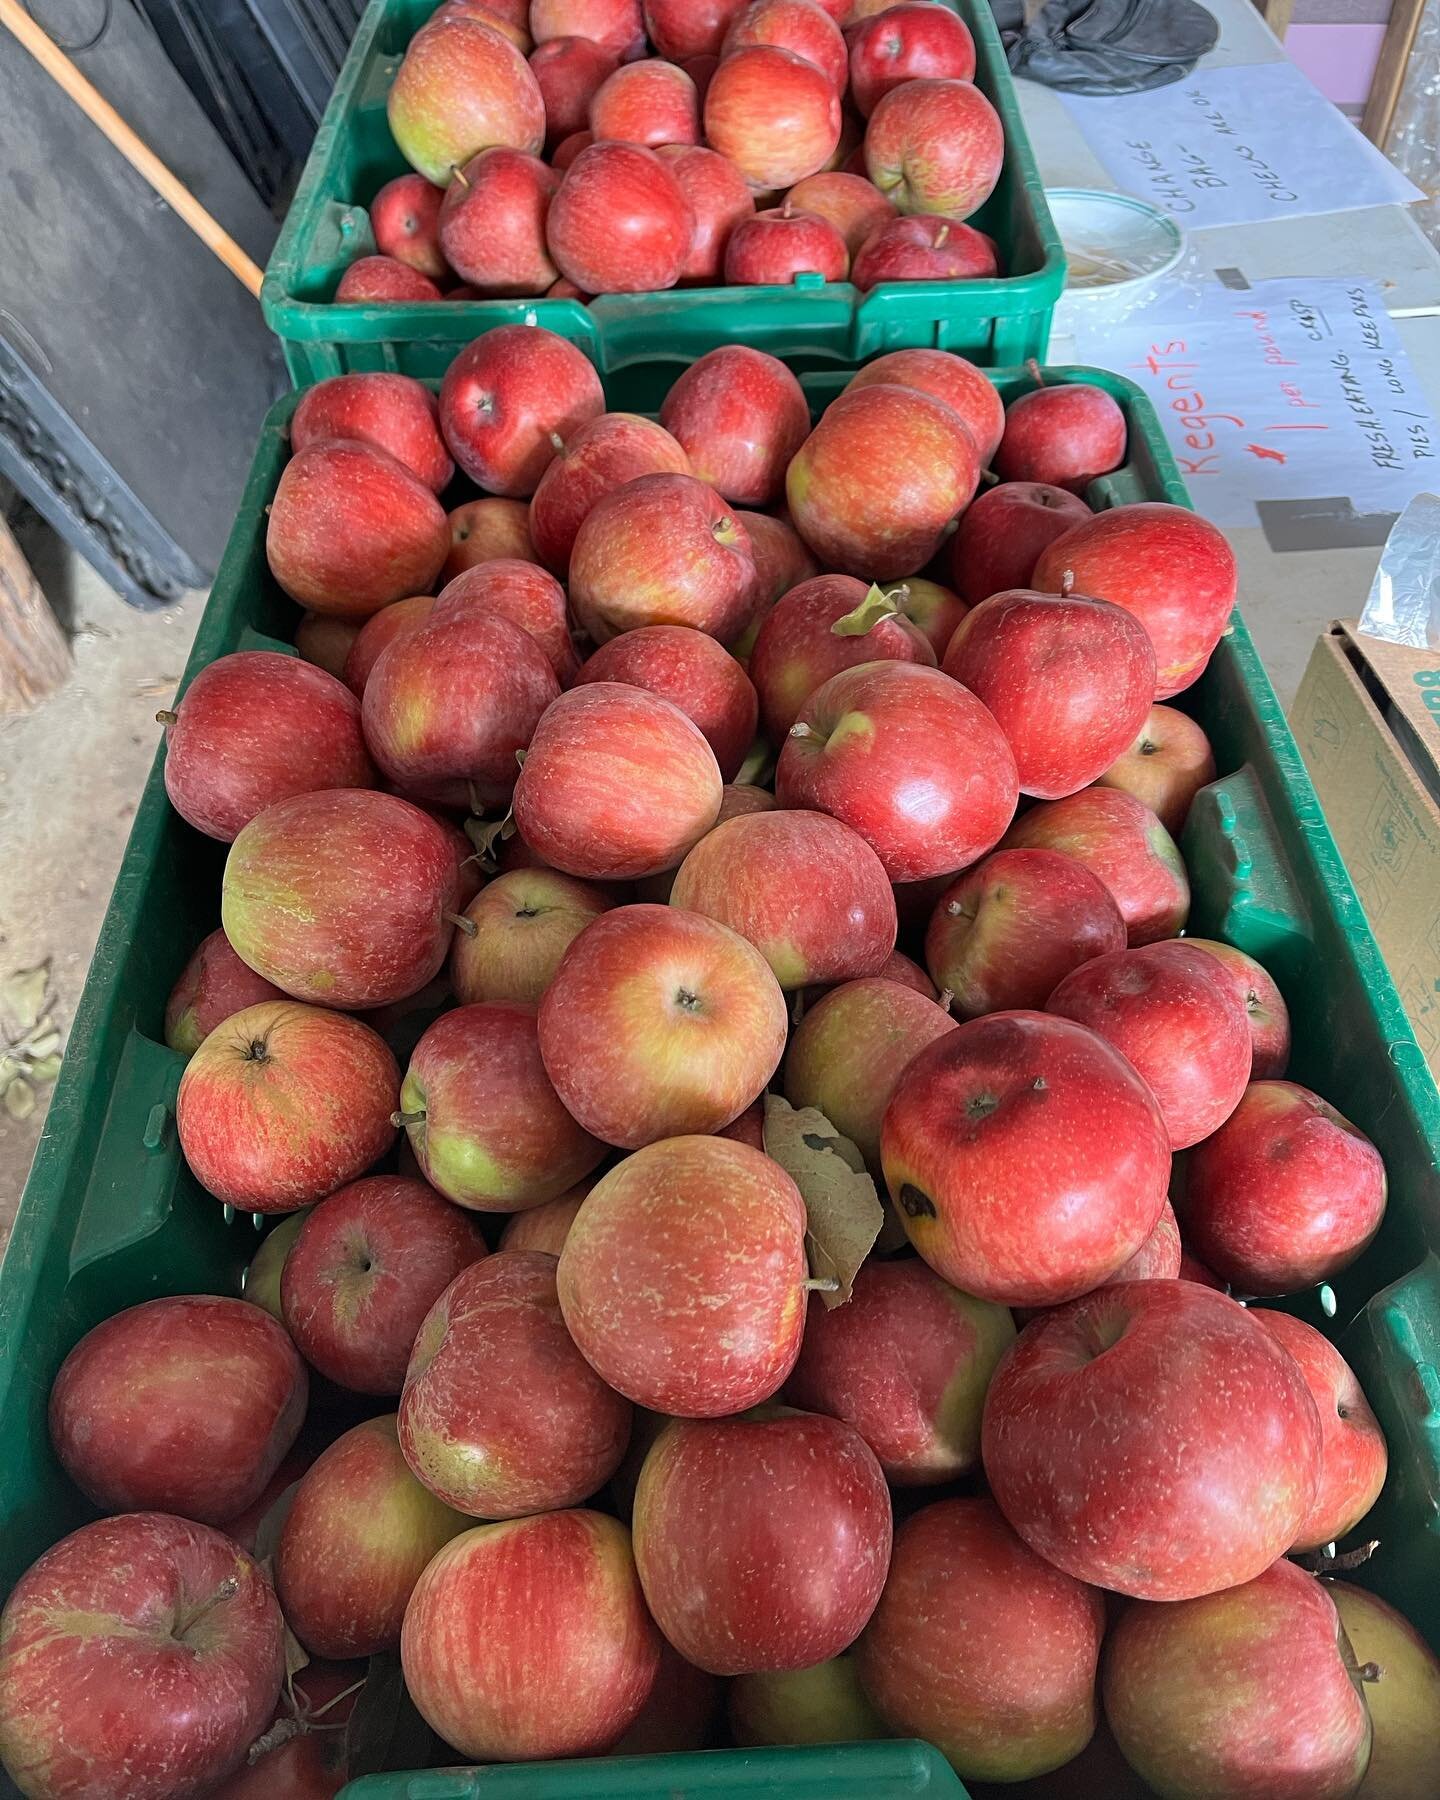 Yes, we still have lots of Regent apples and Haralson apples to sell on the farm for just one dollar per pound. There will be some smalls and seconds for $.50 per pound. Haralson apples are slightly tart but great for fresh eating and pies. Regent ap